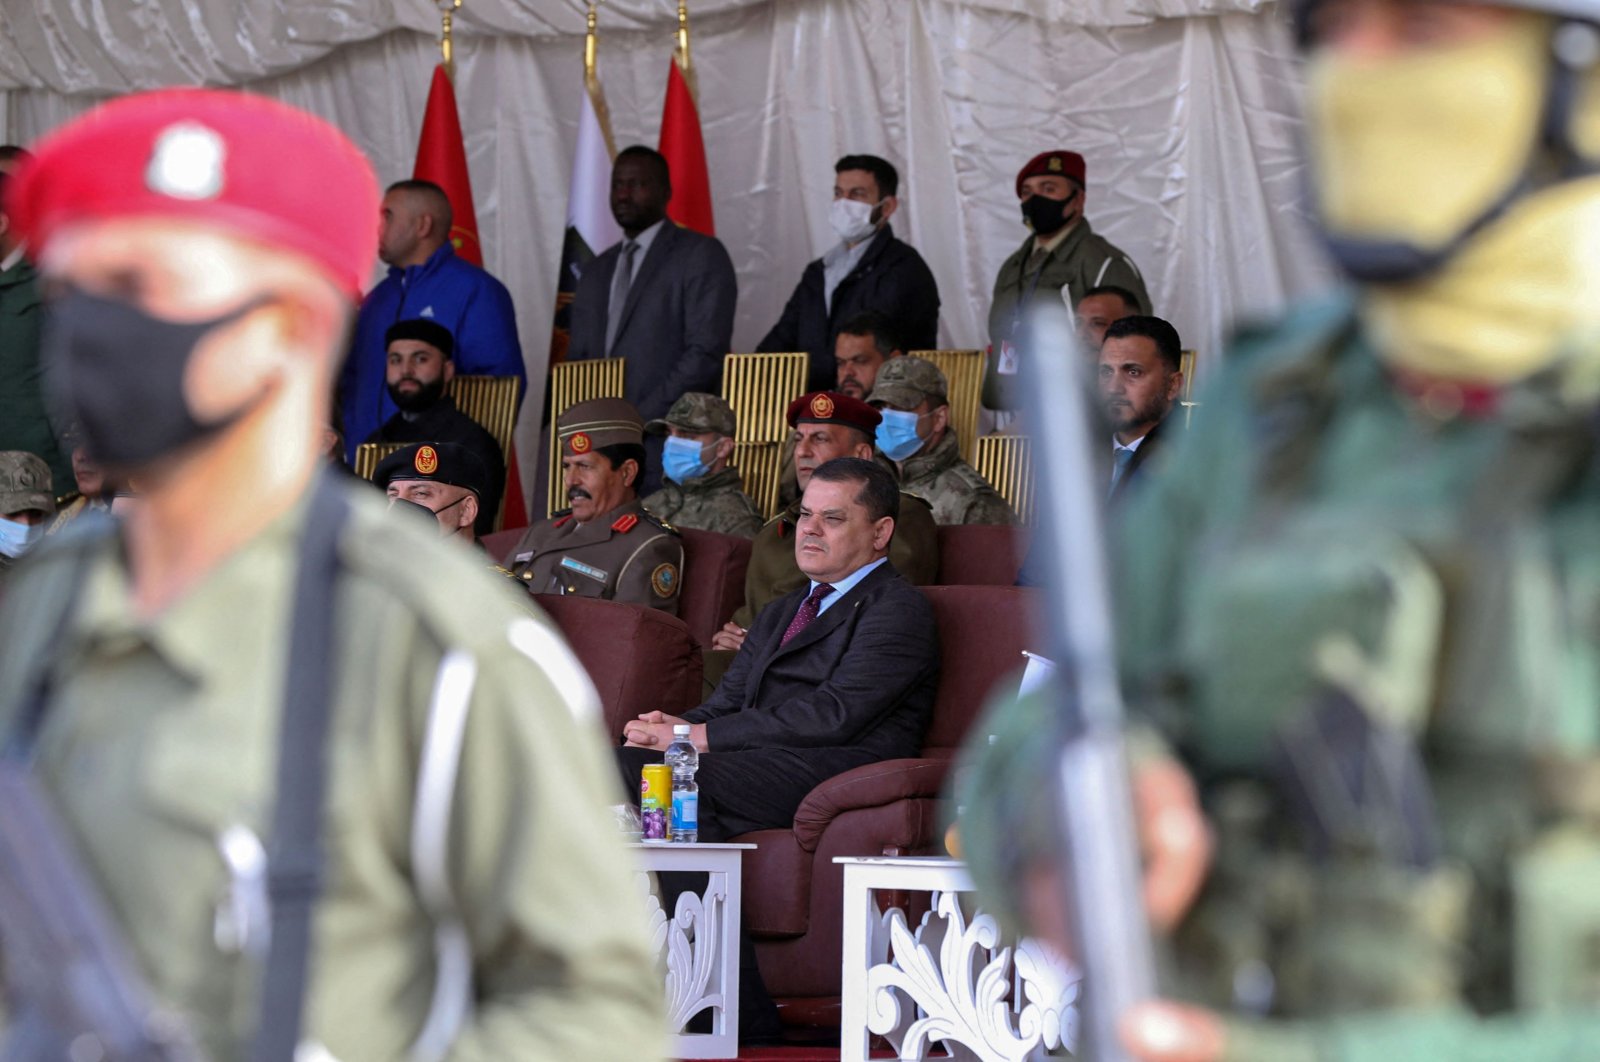 Libyan Prime Minister Abdul Hamid Mohammed Dbeibah attends a military graduation ceremony in the capital Tripoli, Libya, Jan. 23, 2022. (AFP Photo)